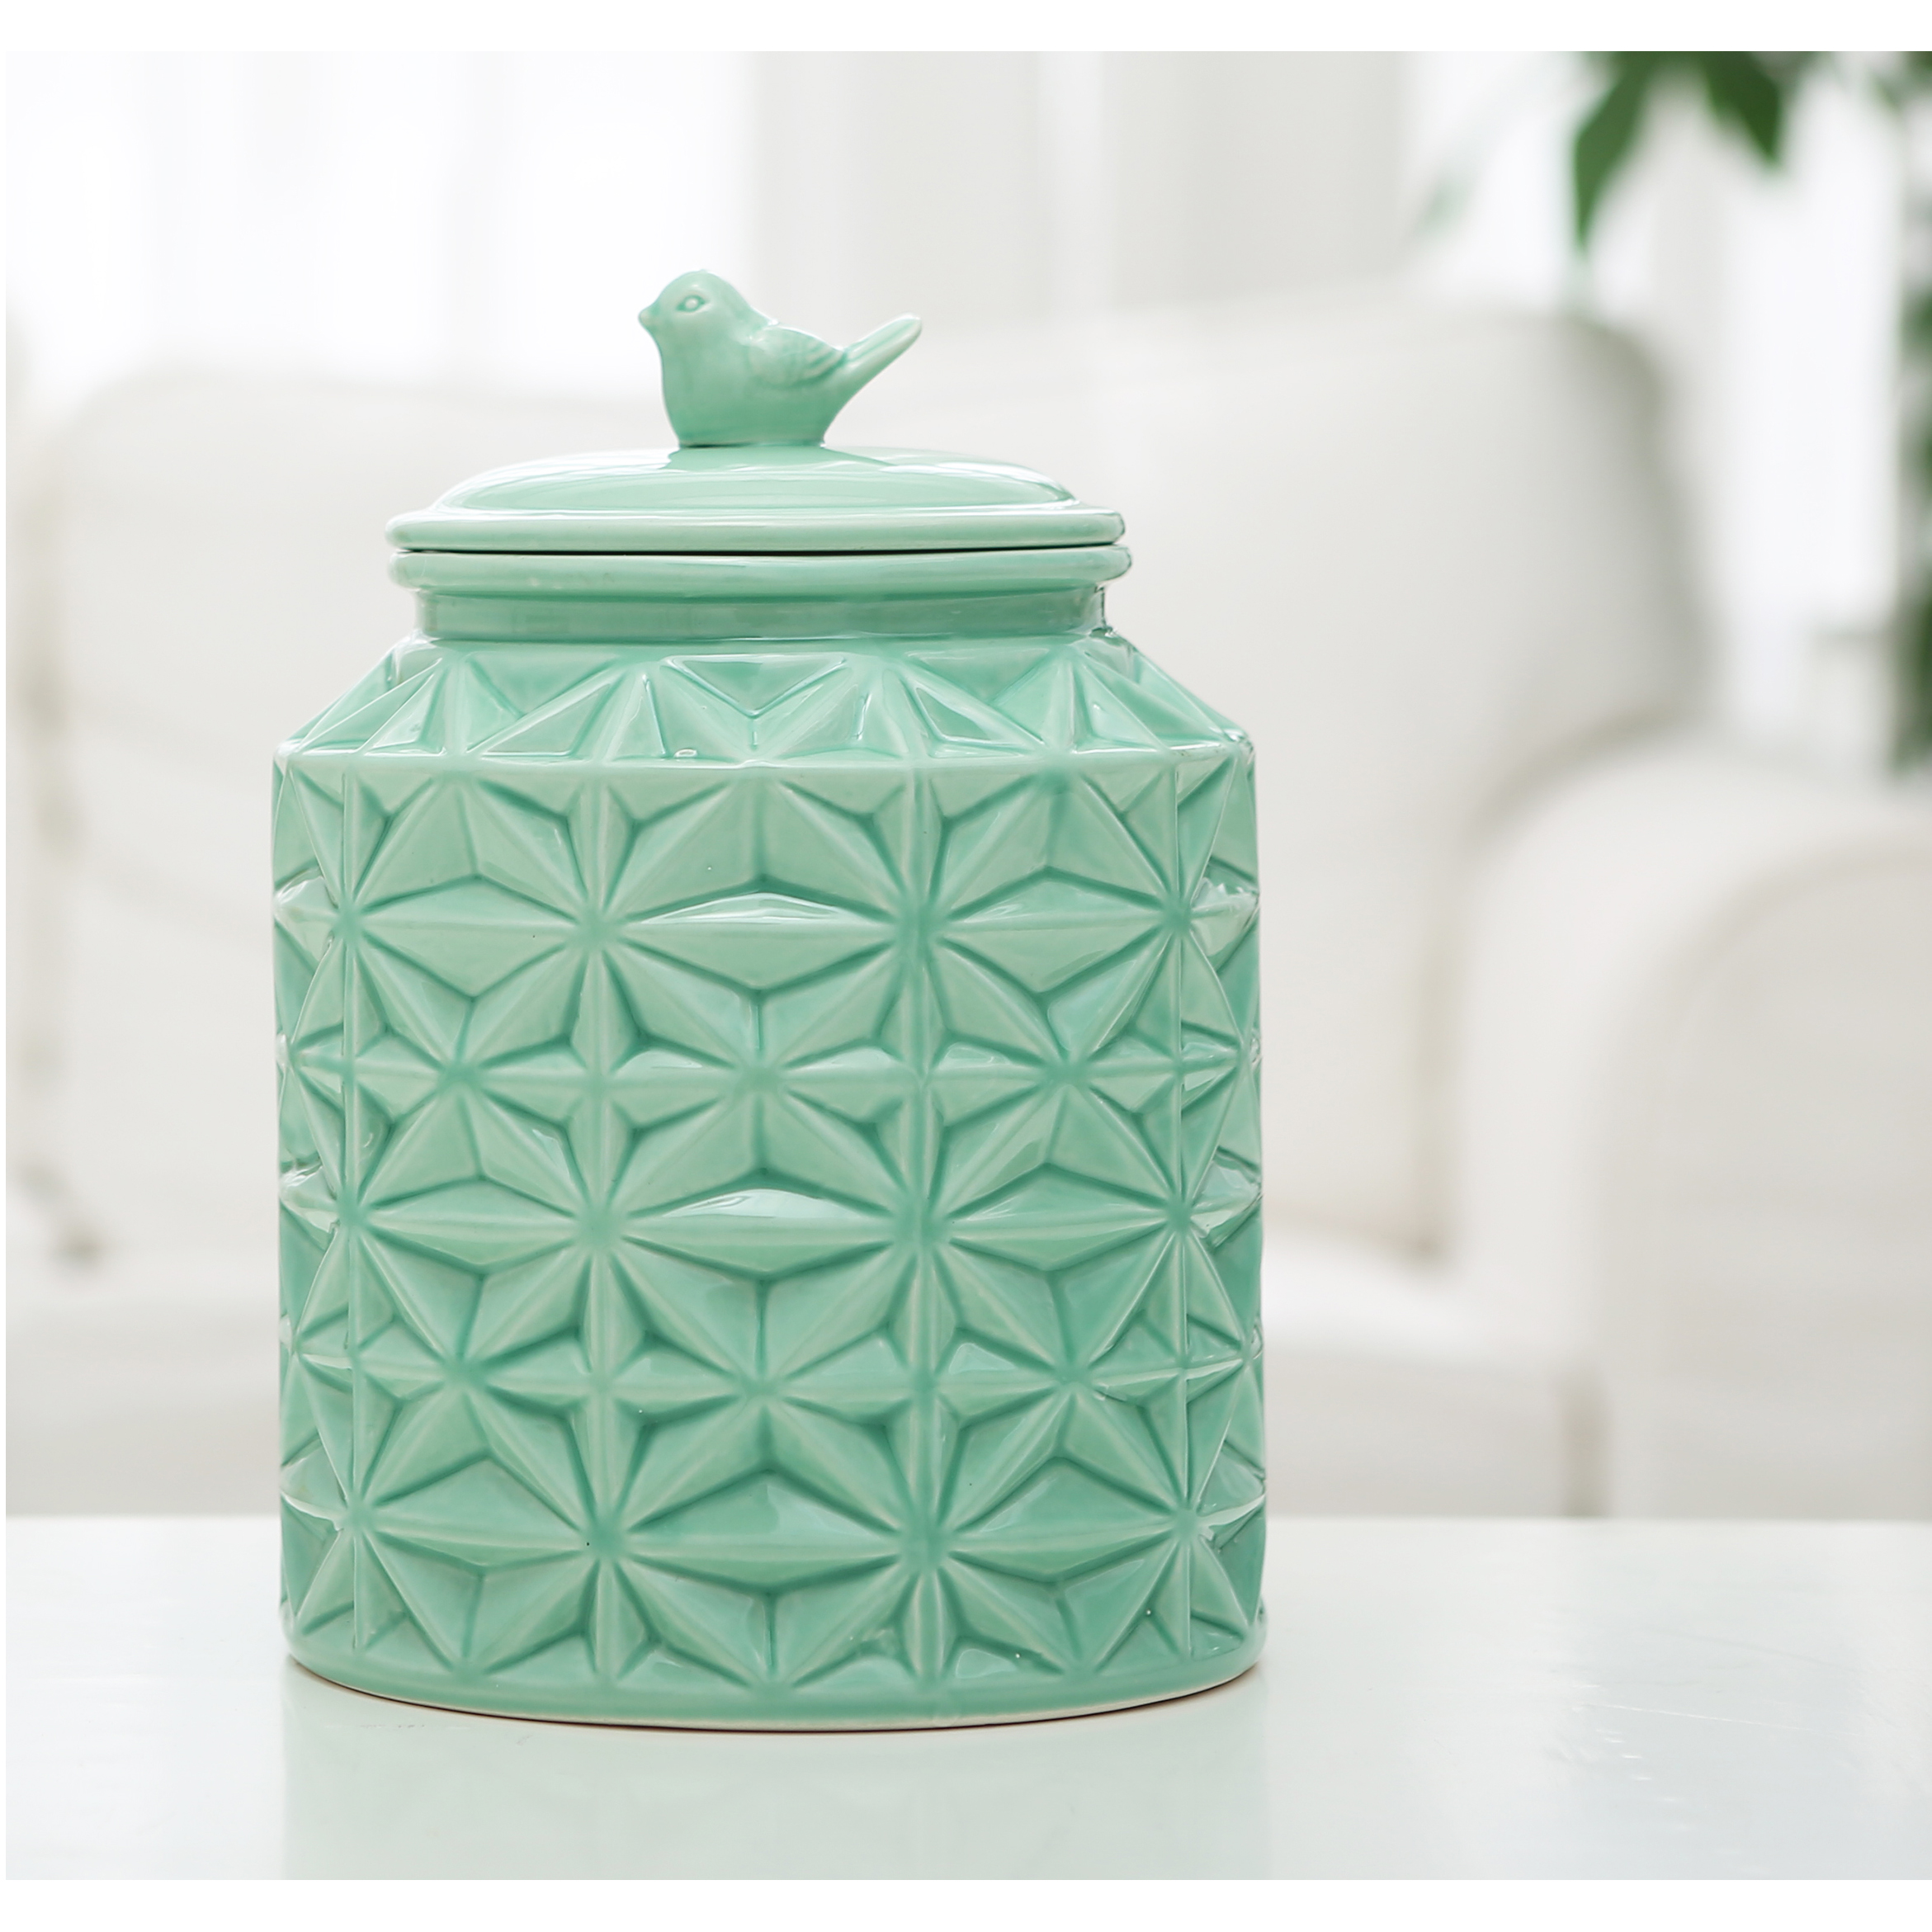 Turquoise Ceramic Kitchen Flour Canister Cookie Jar Abstract Star ...